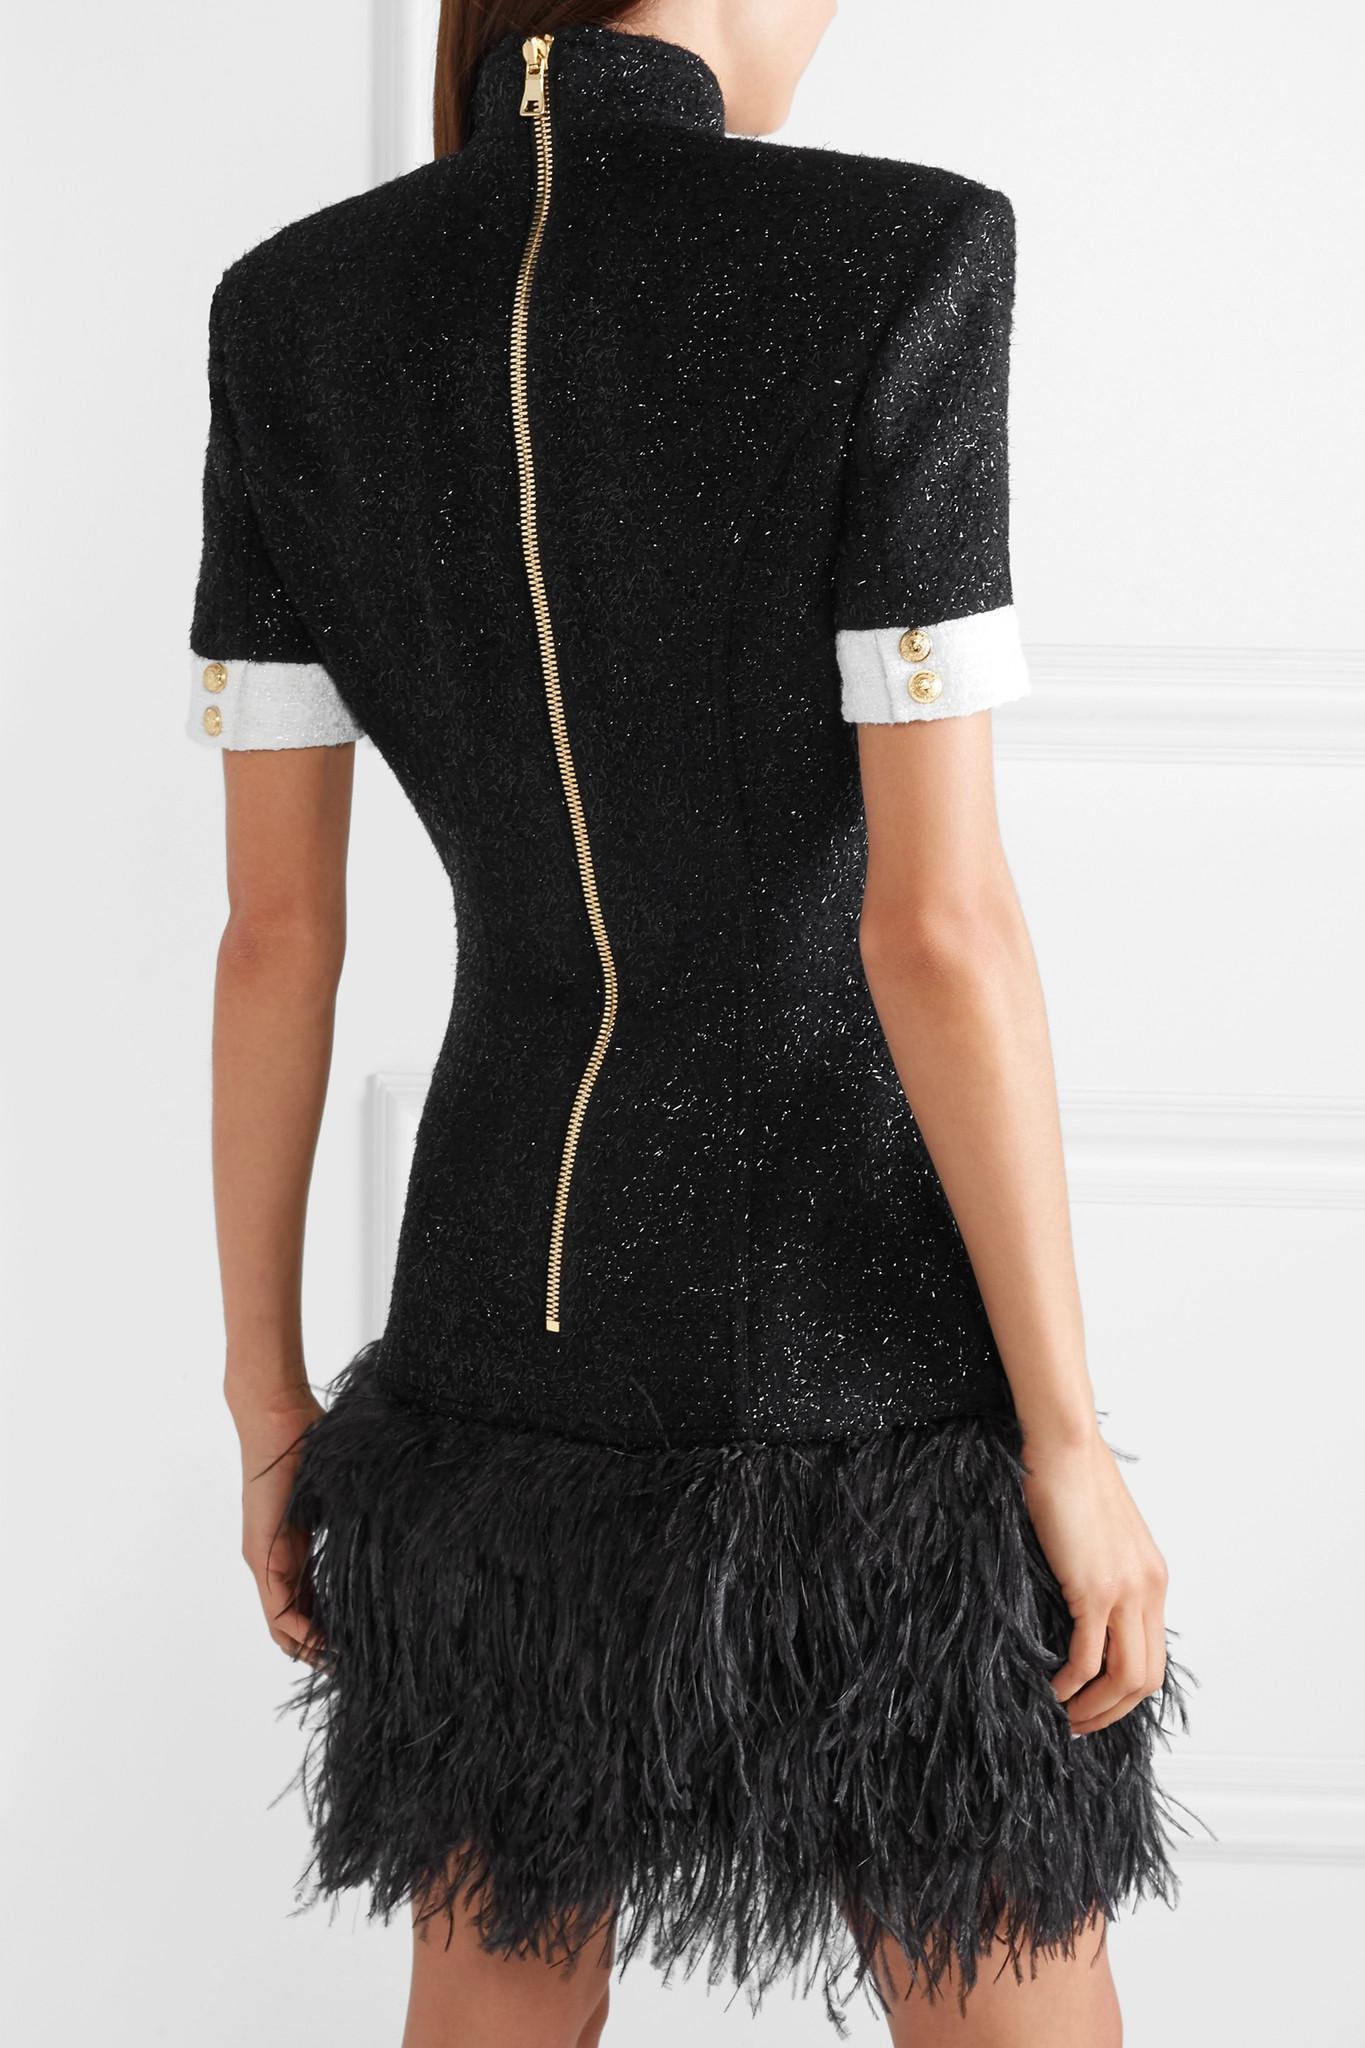 Balmain Metallic Tweed Dress With Ostrich Feathers in Black - Lyst